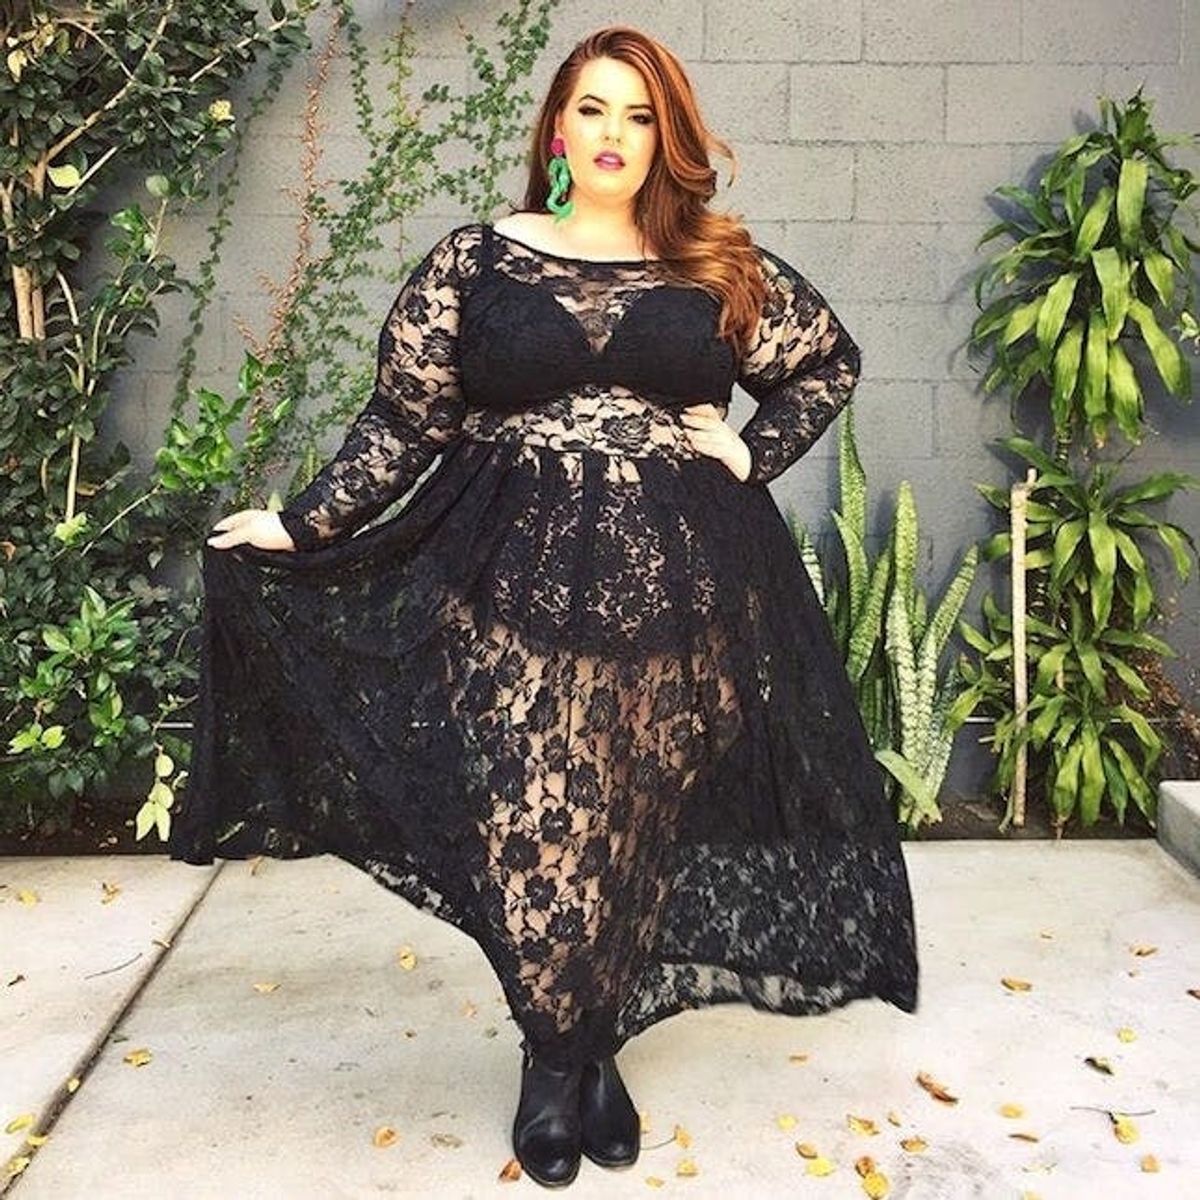 This Plus-Size Model’s New Clothing Line Will Have You Going YAAAS